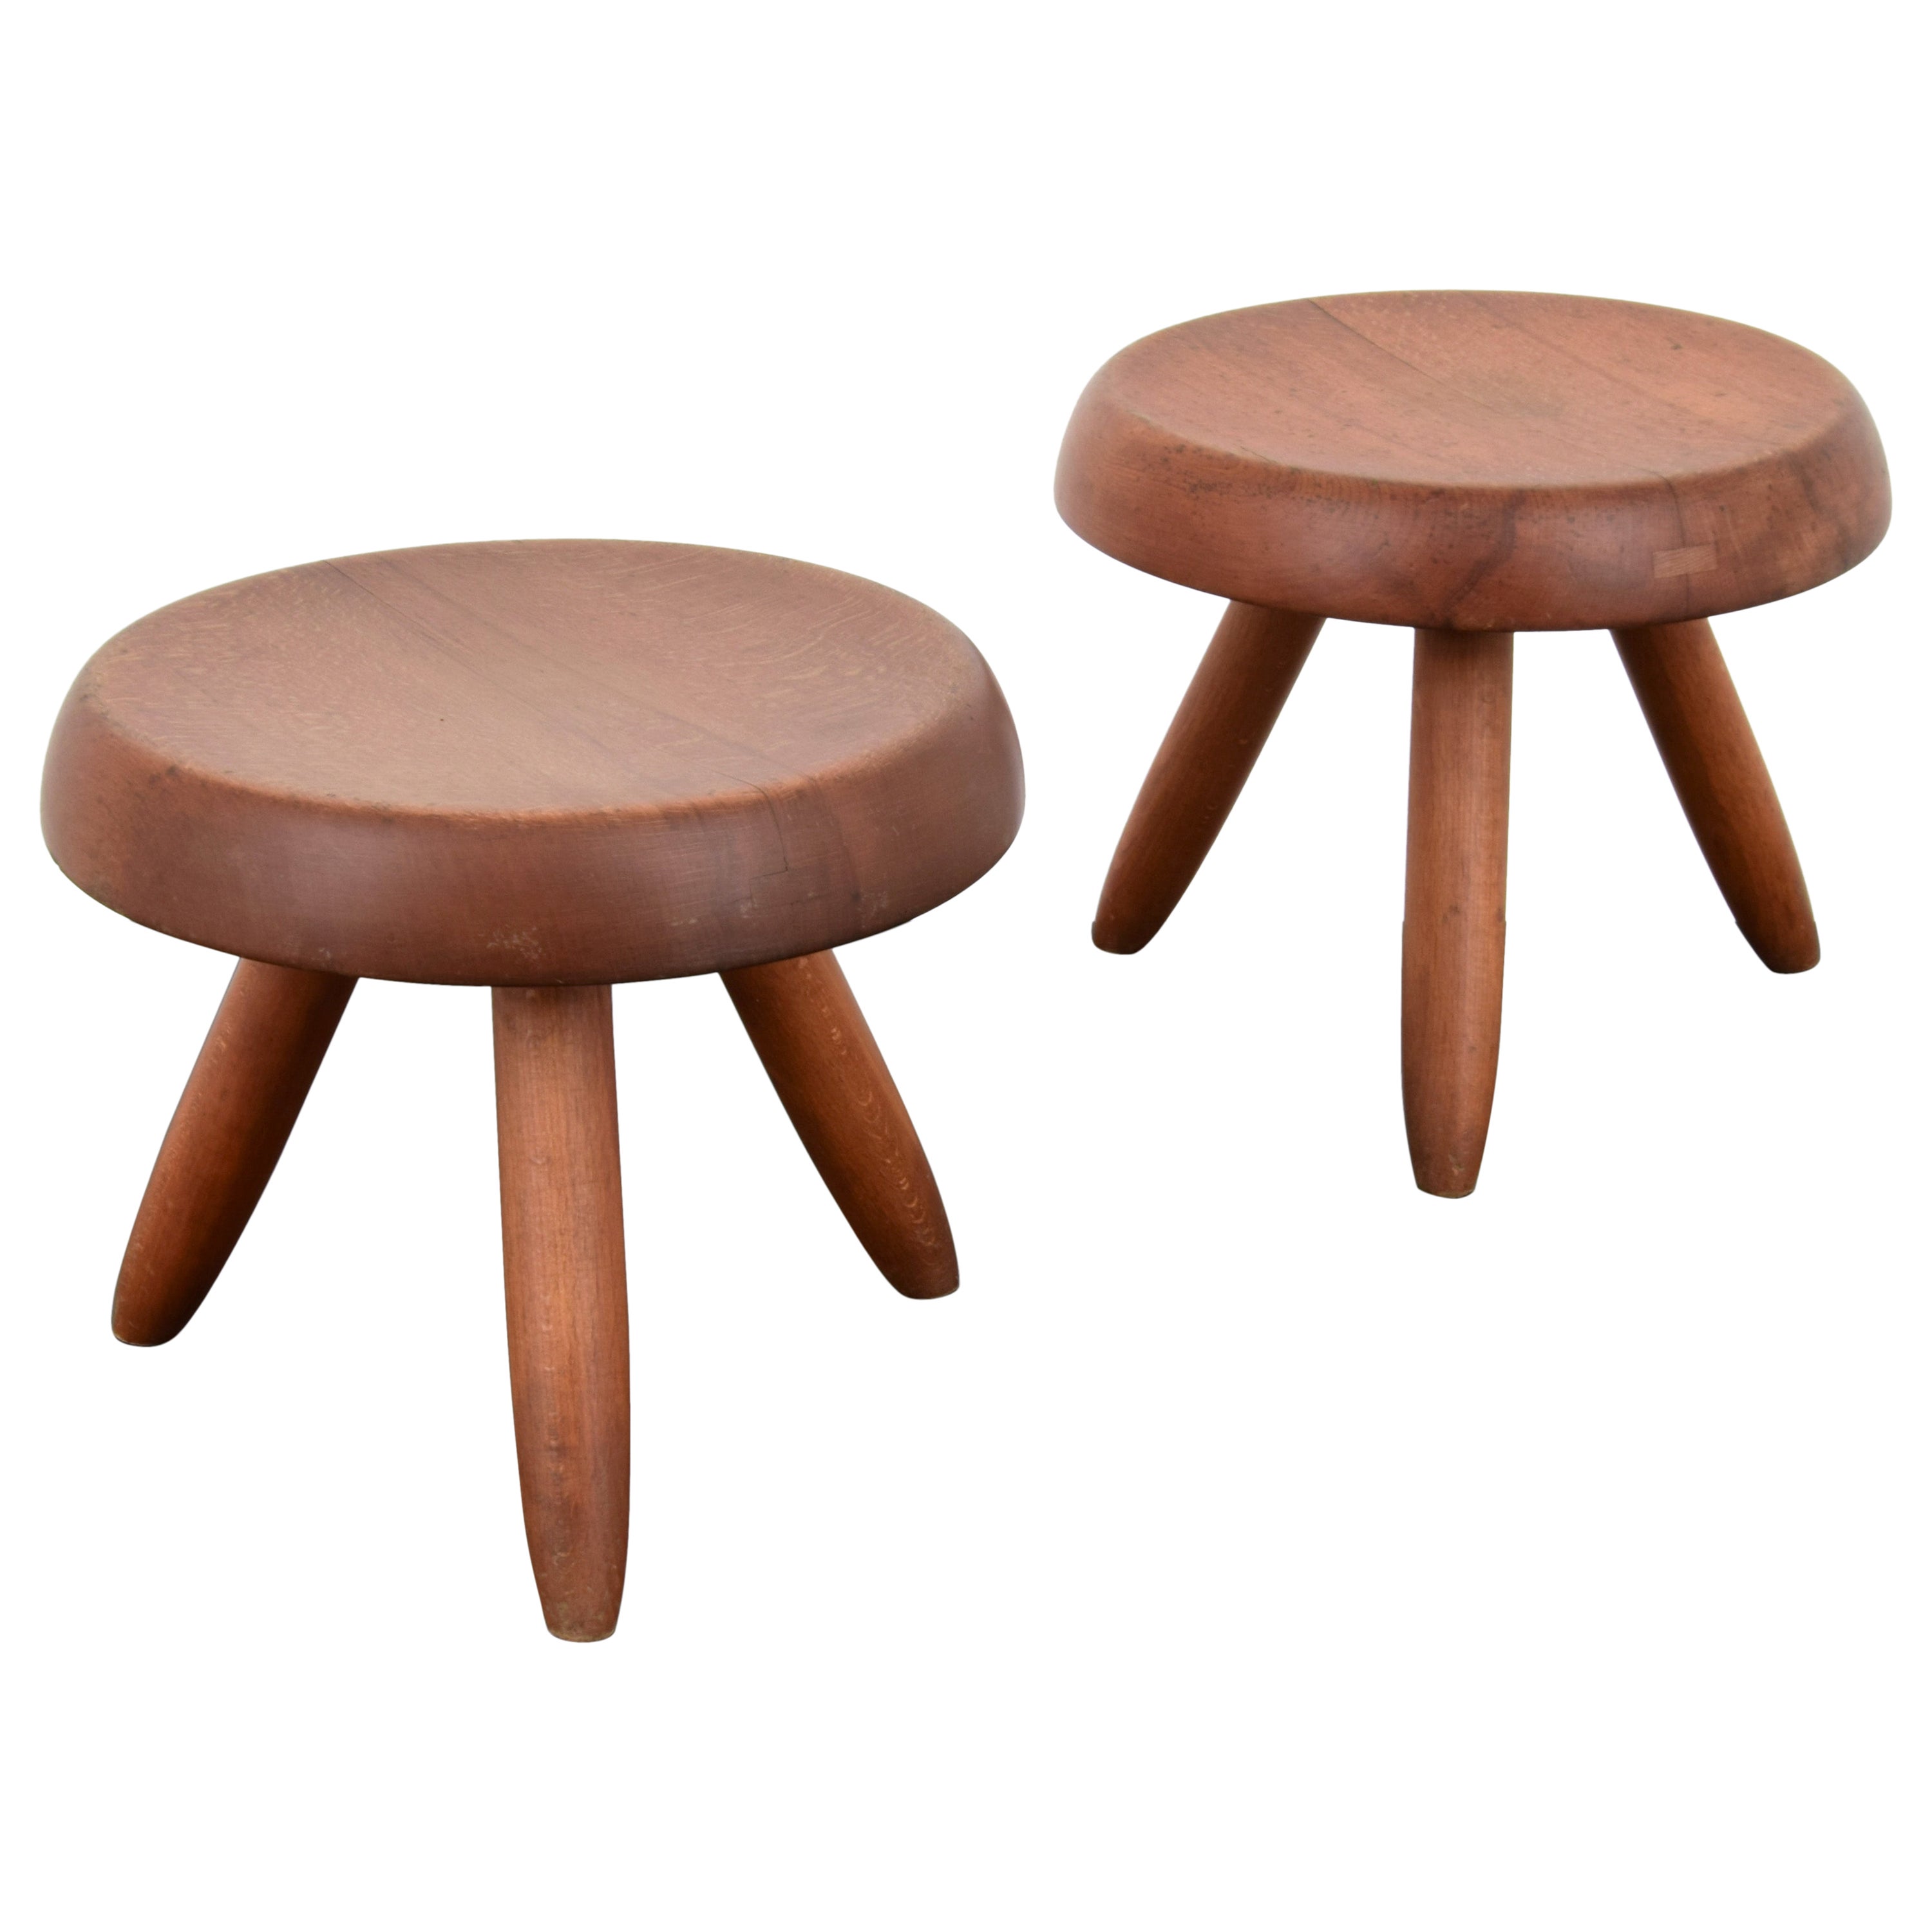 Charlotte Perriand Low Stool